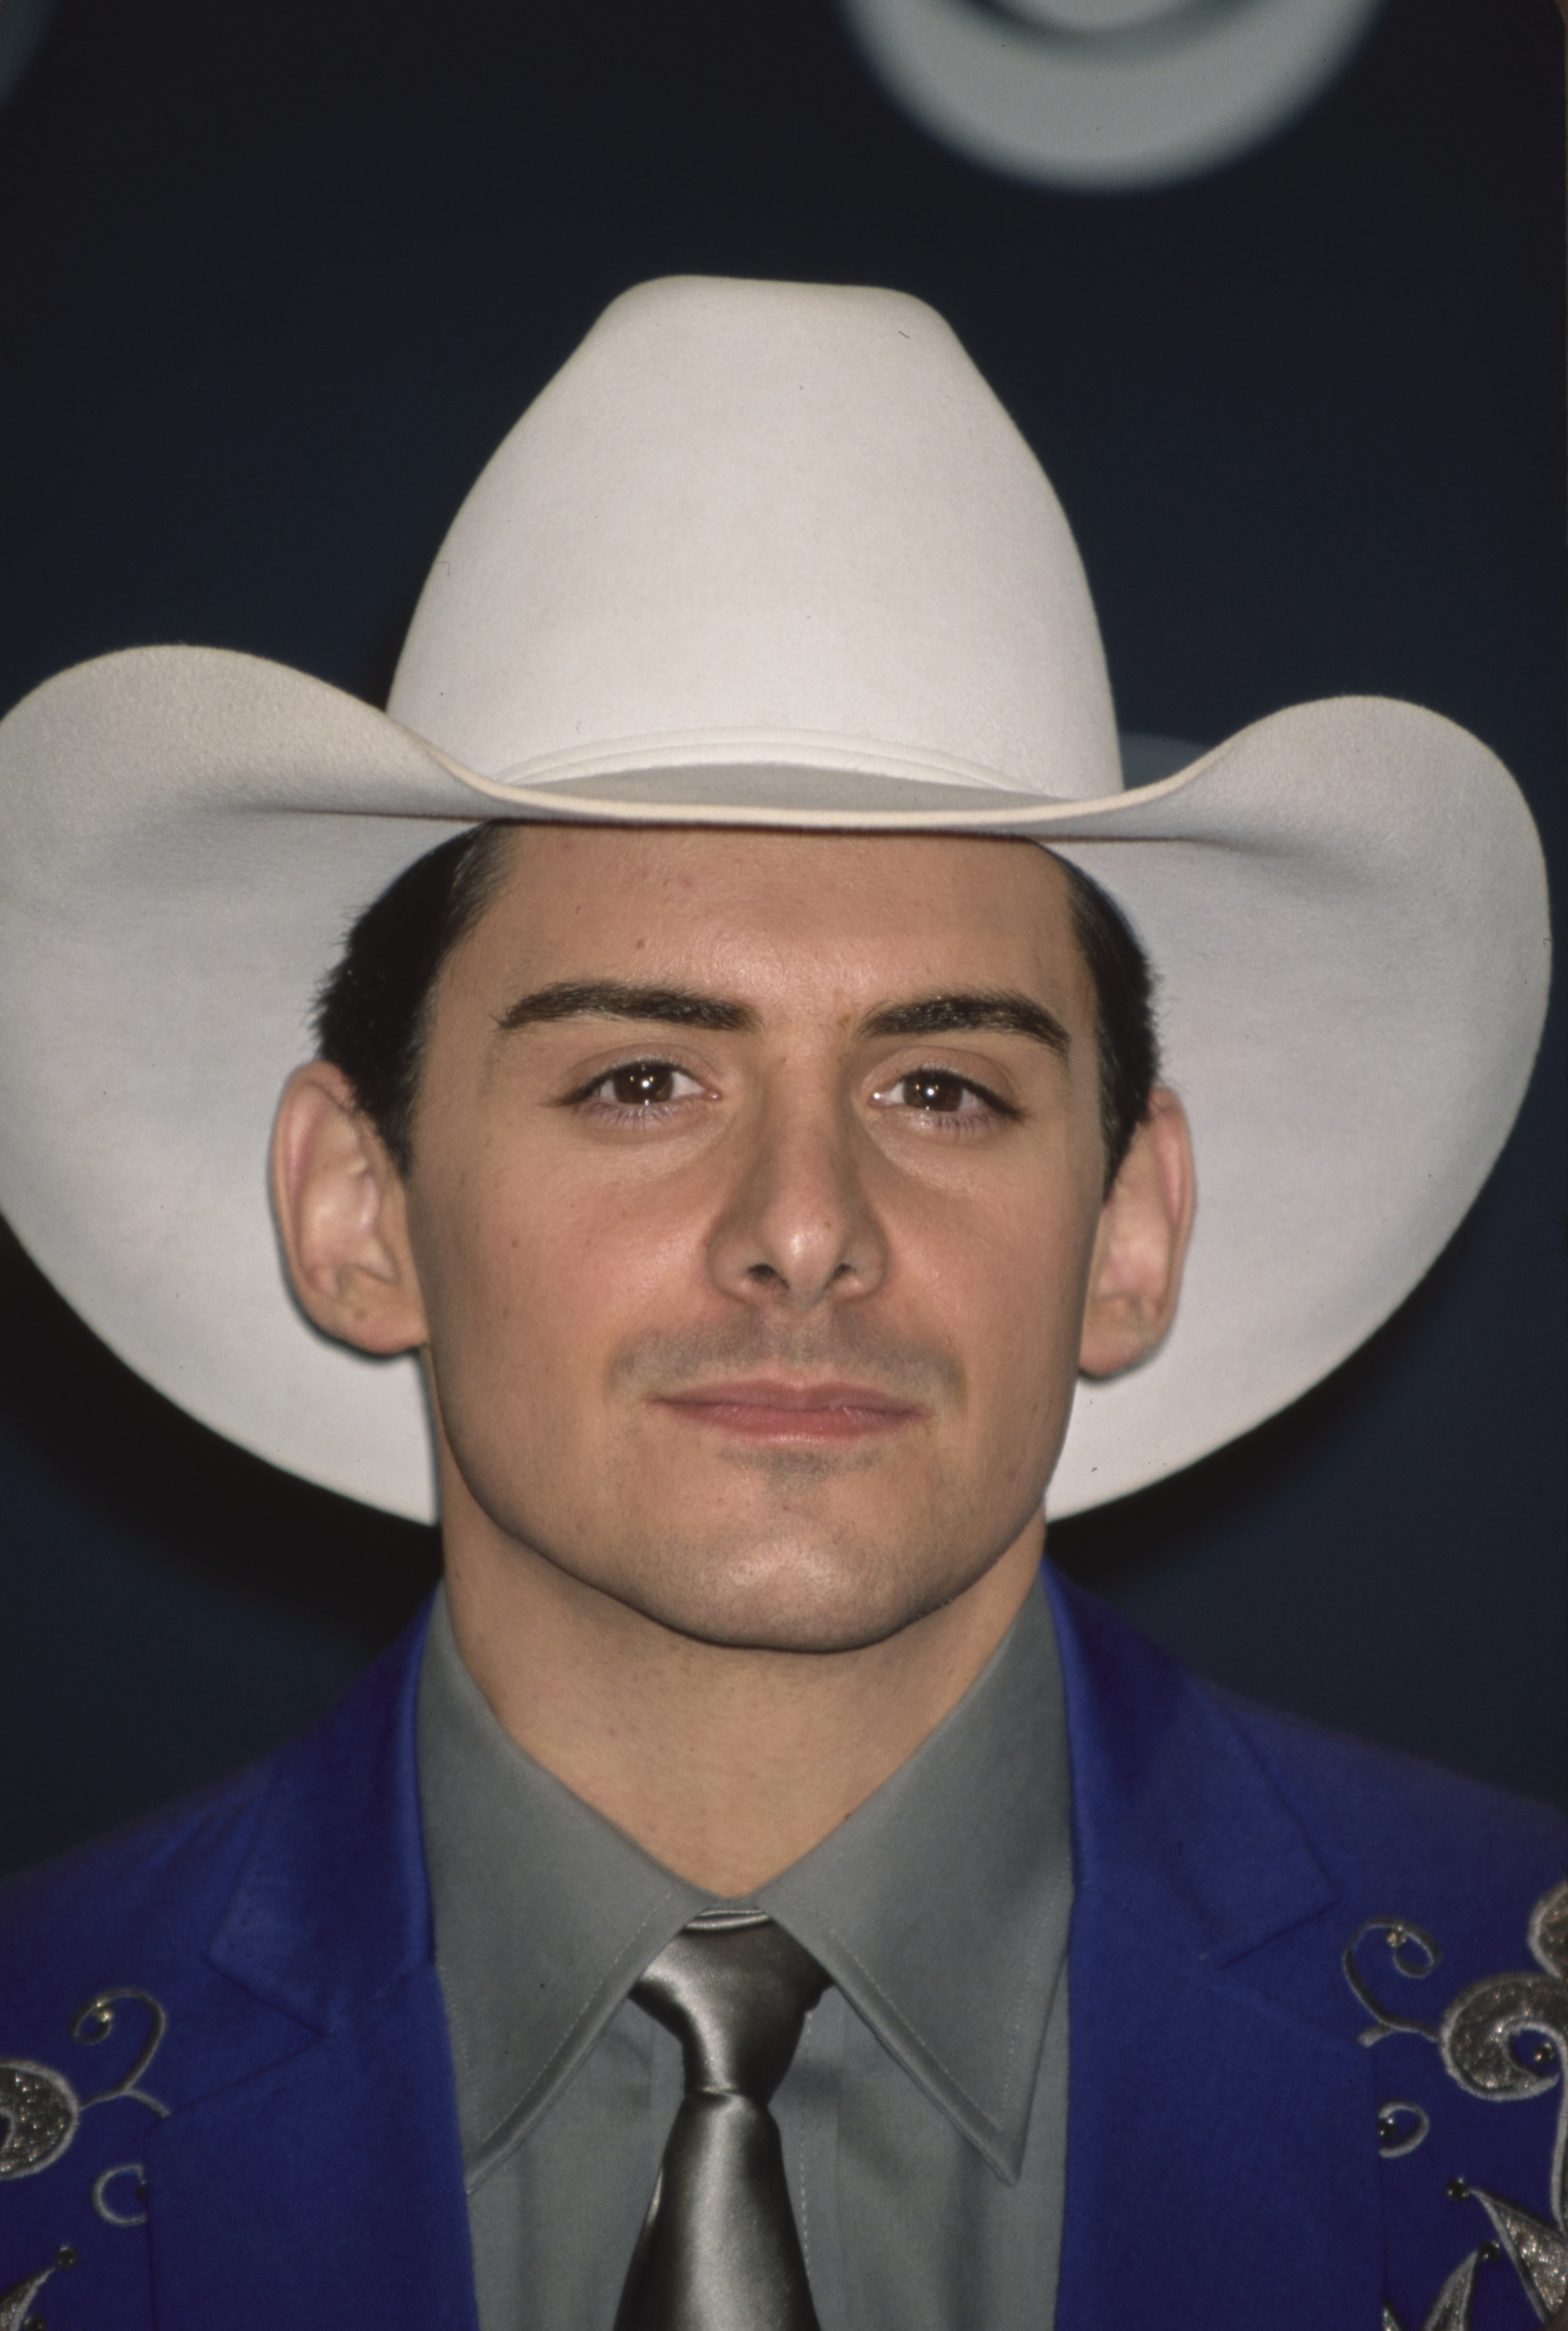 image of brad paisley wearing a blue blazer and a white cow boy hat